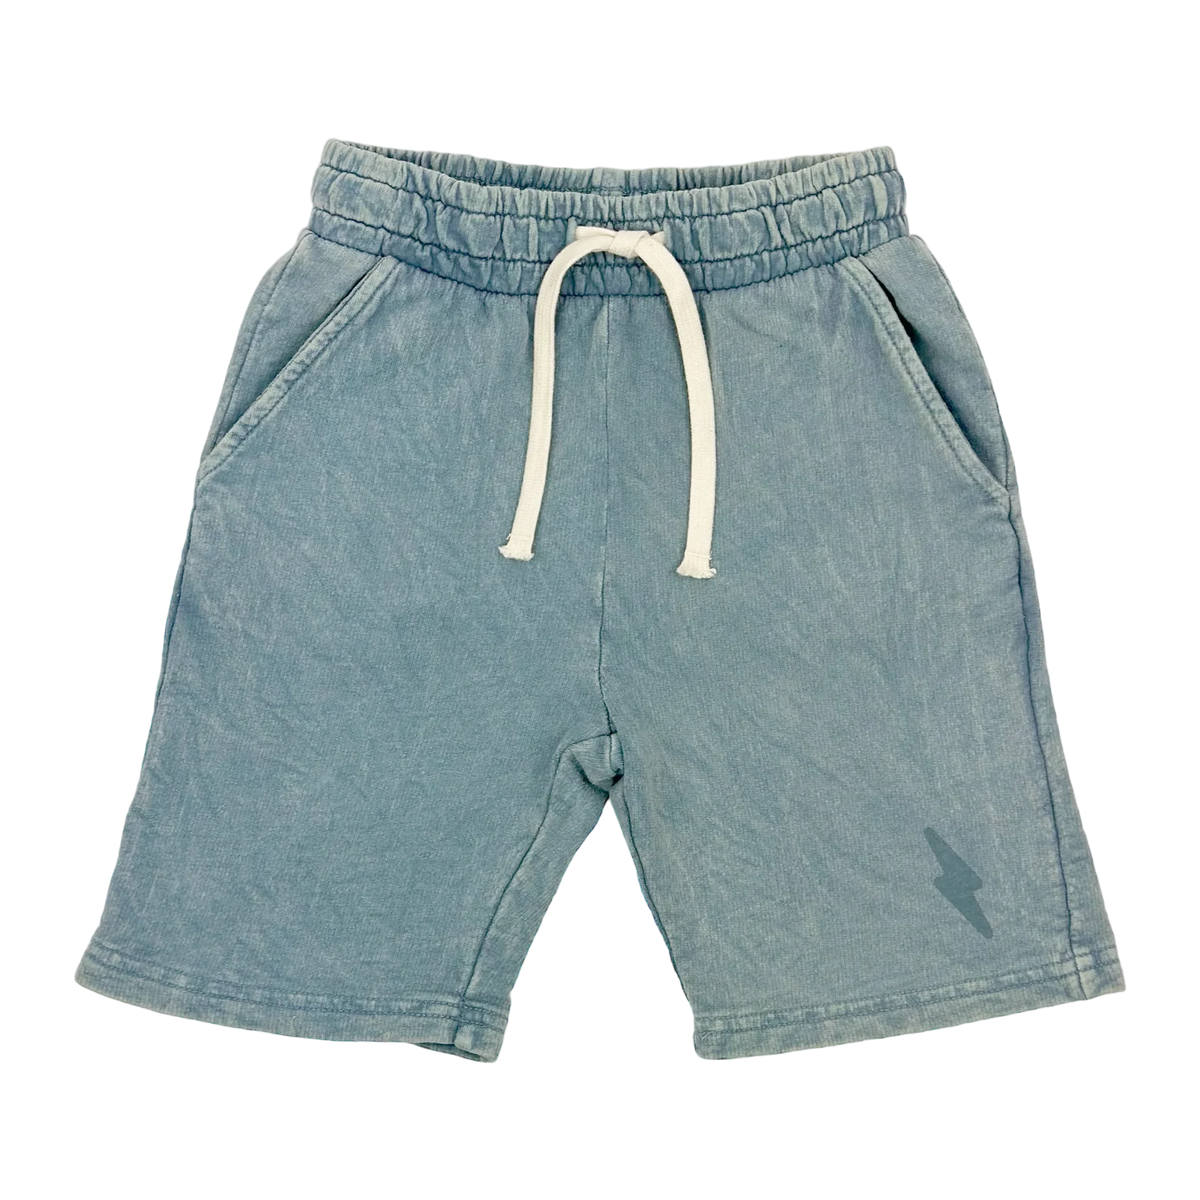 Mineral River Sweat Shorts